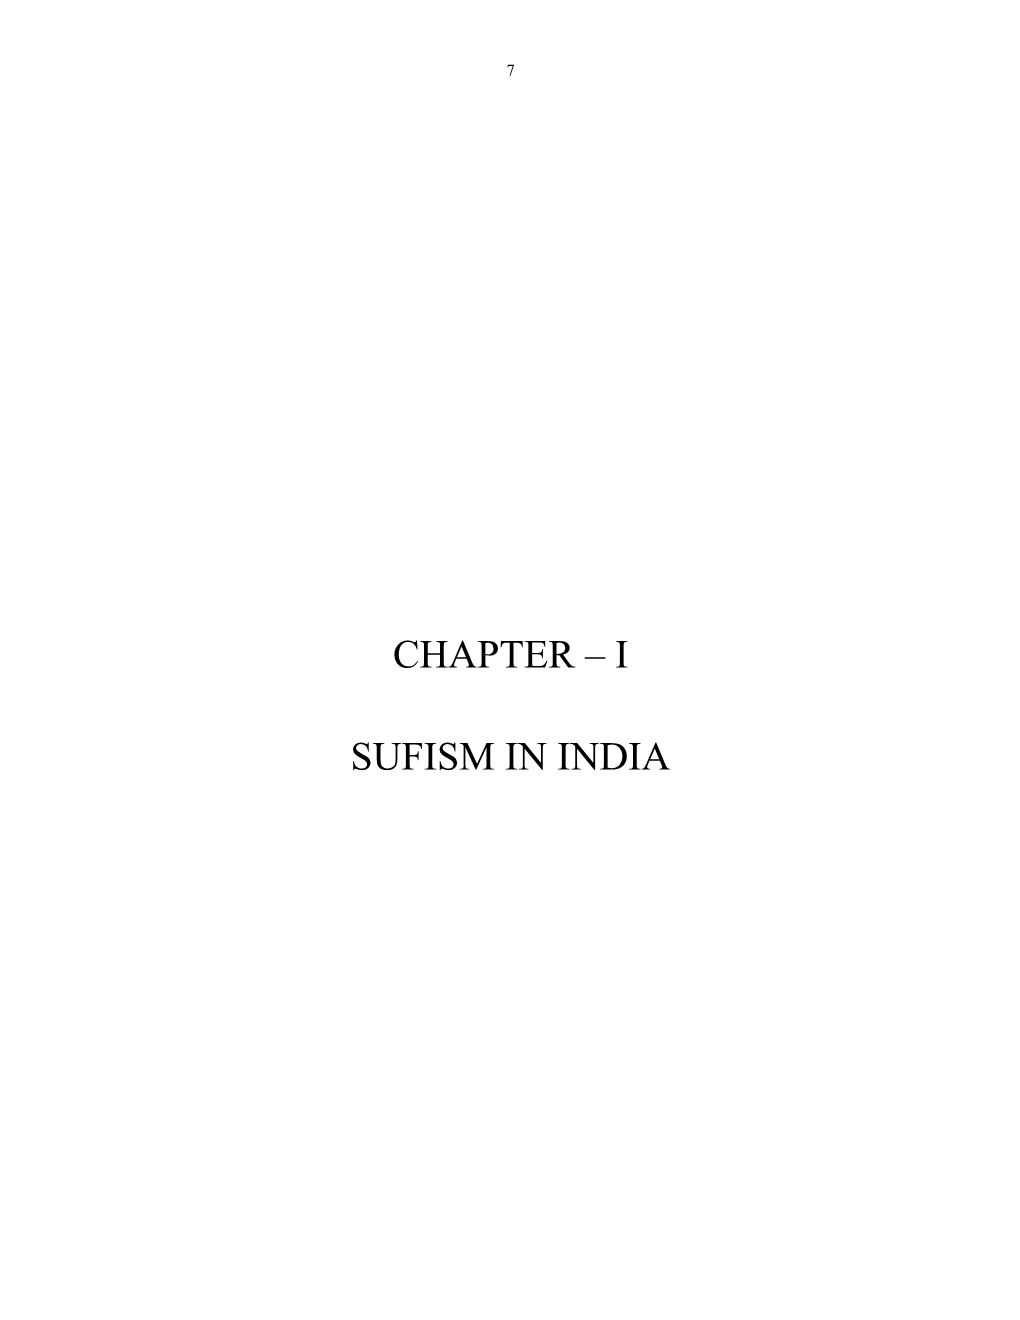 Chapter – I Sufism in India